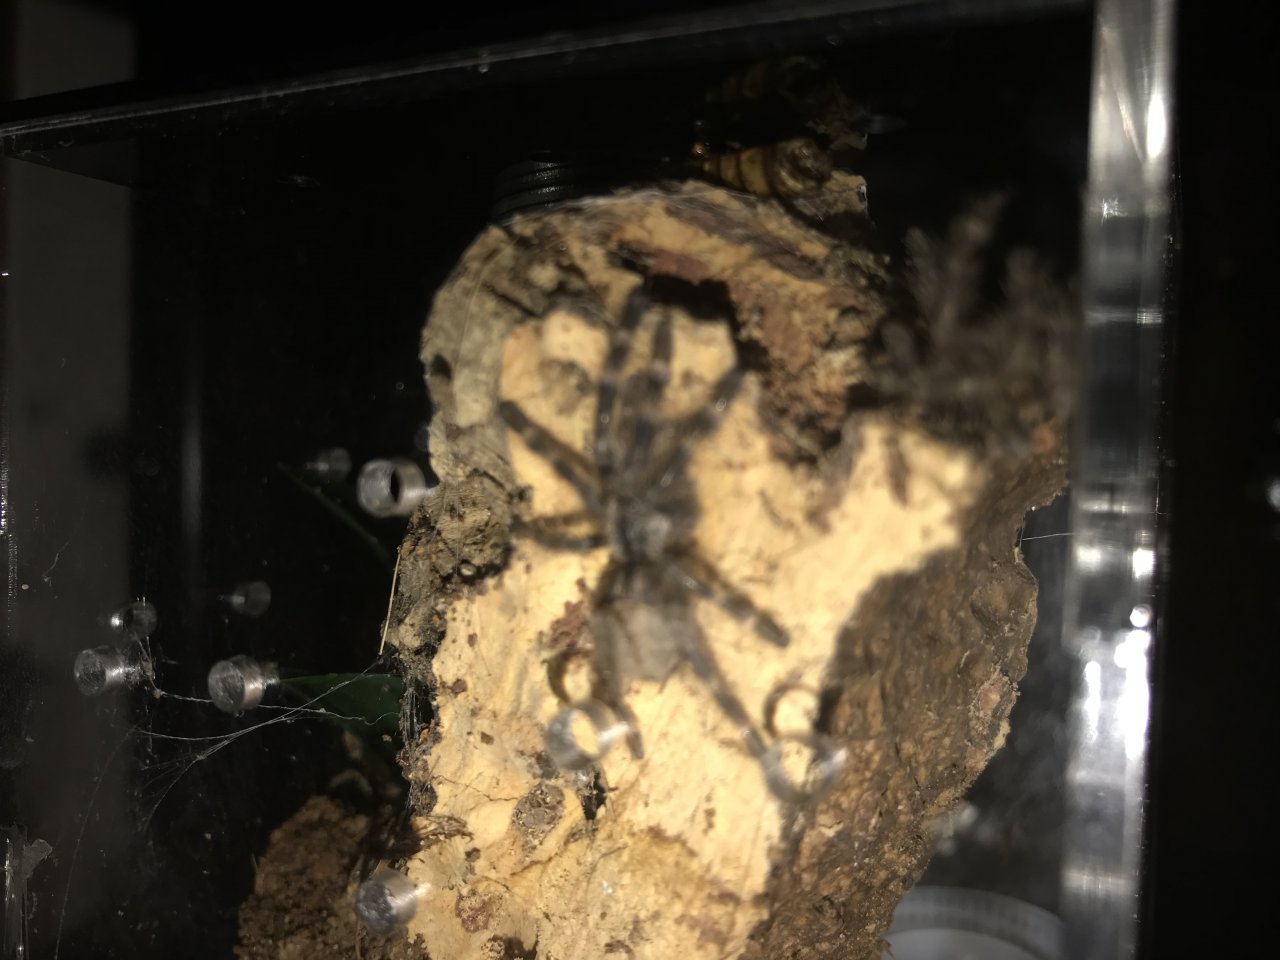 Big growth for P. regalis sling